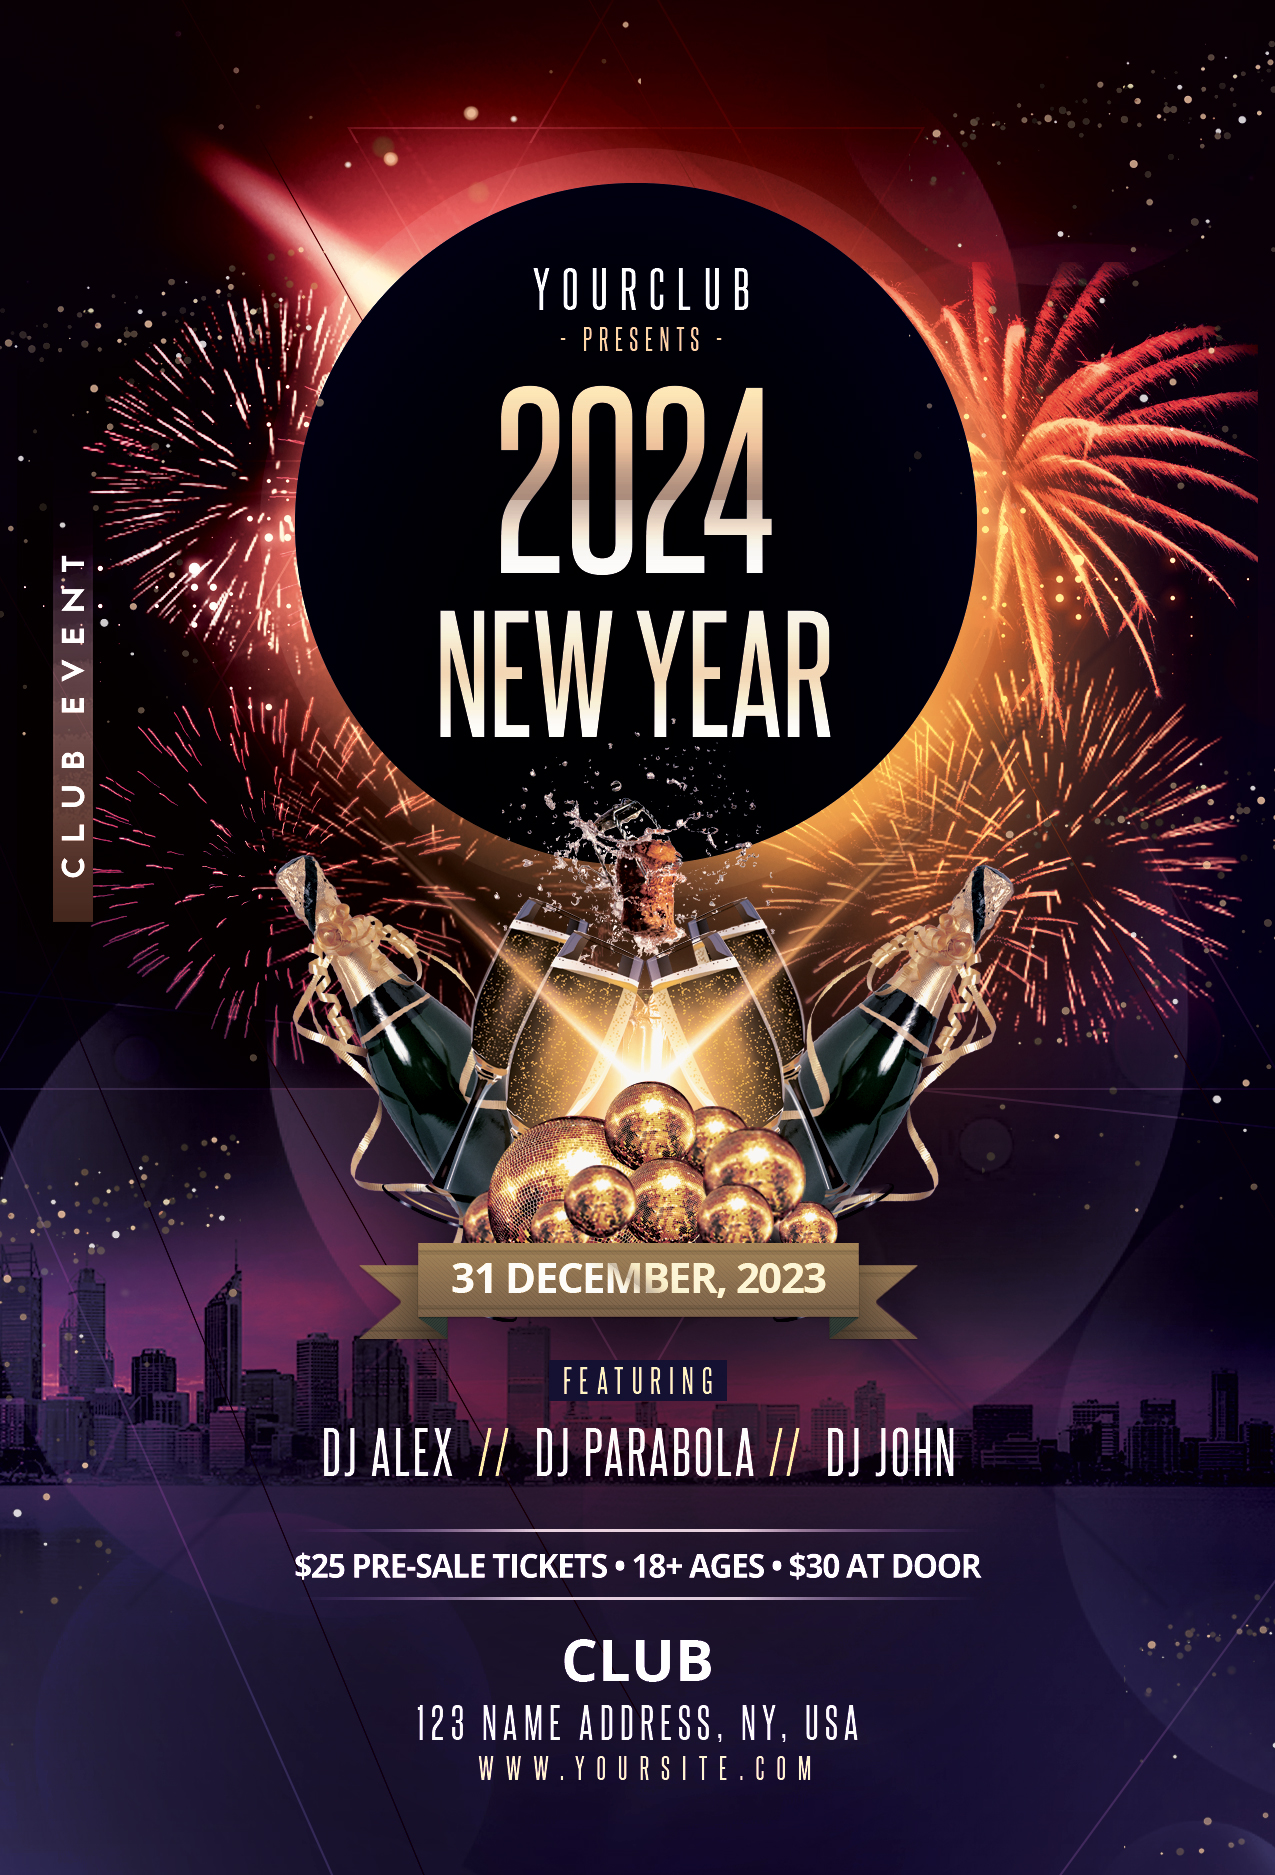 2024 New Year Psd Flyer Template Pixelsdesign Psd Fly 